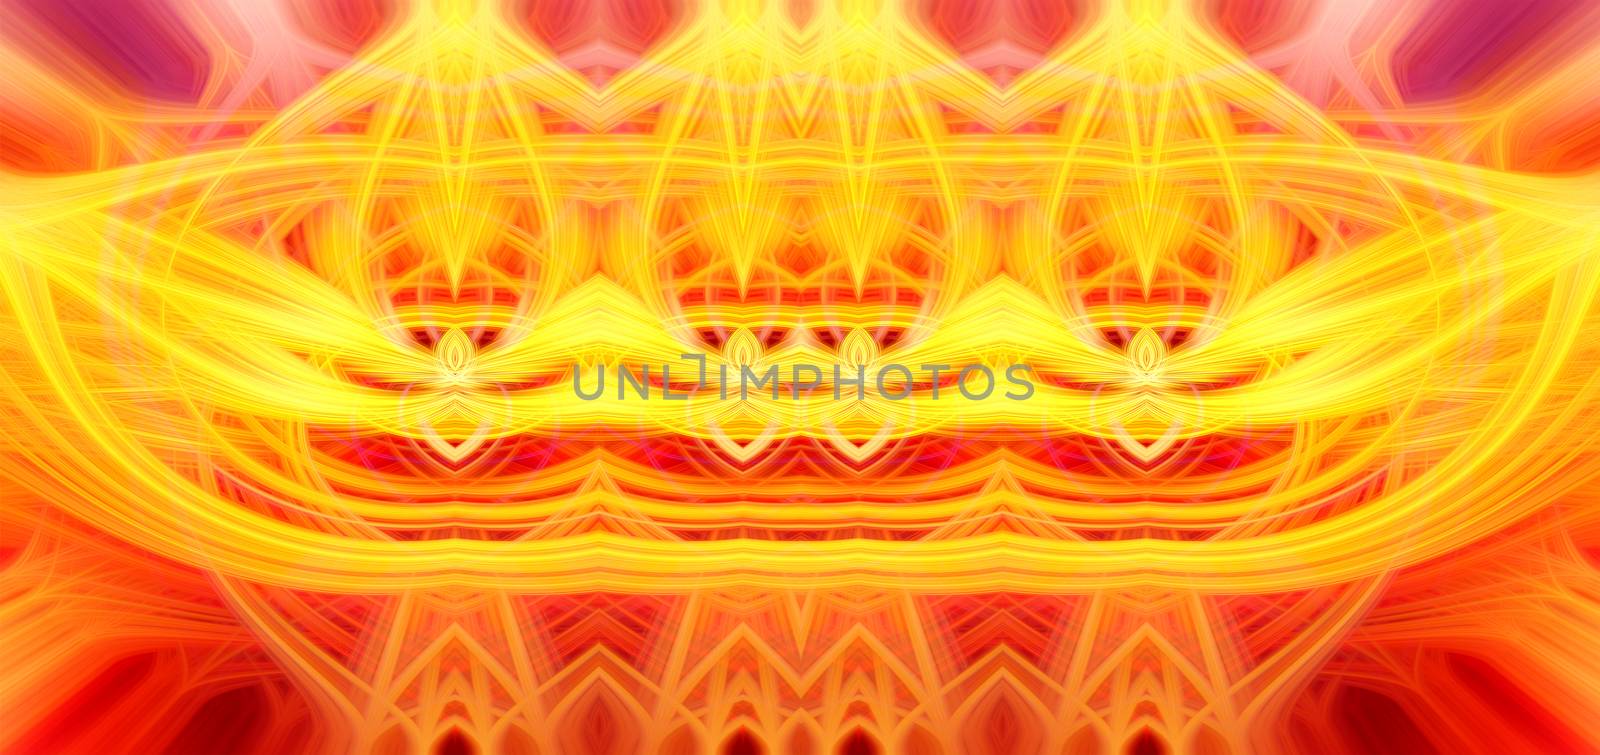 Beautiful abstract intertwined glowing 3d fibers forming a shape of sparkle, flame, flower, interlinked hearts. Yellow, orange, and red colors. Banner size. Illustration.